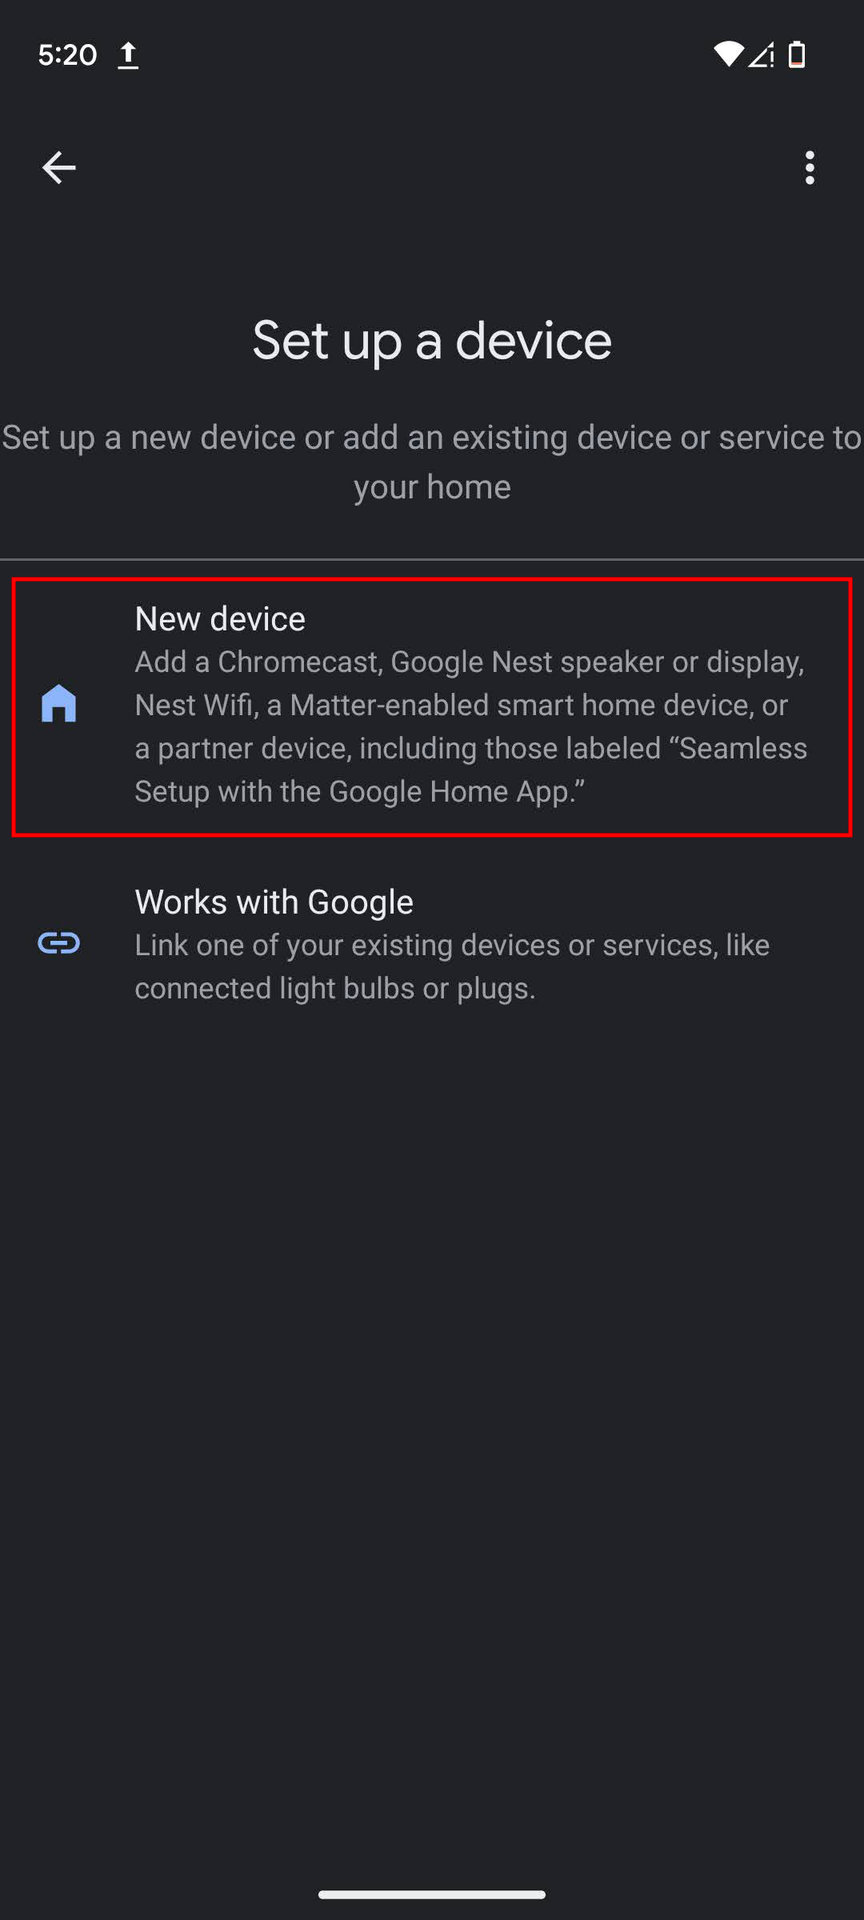 How to add devices to Google Home (2)